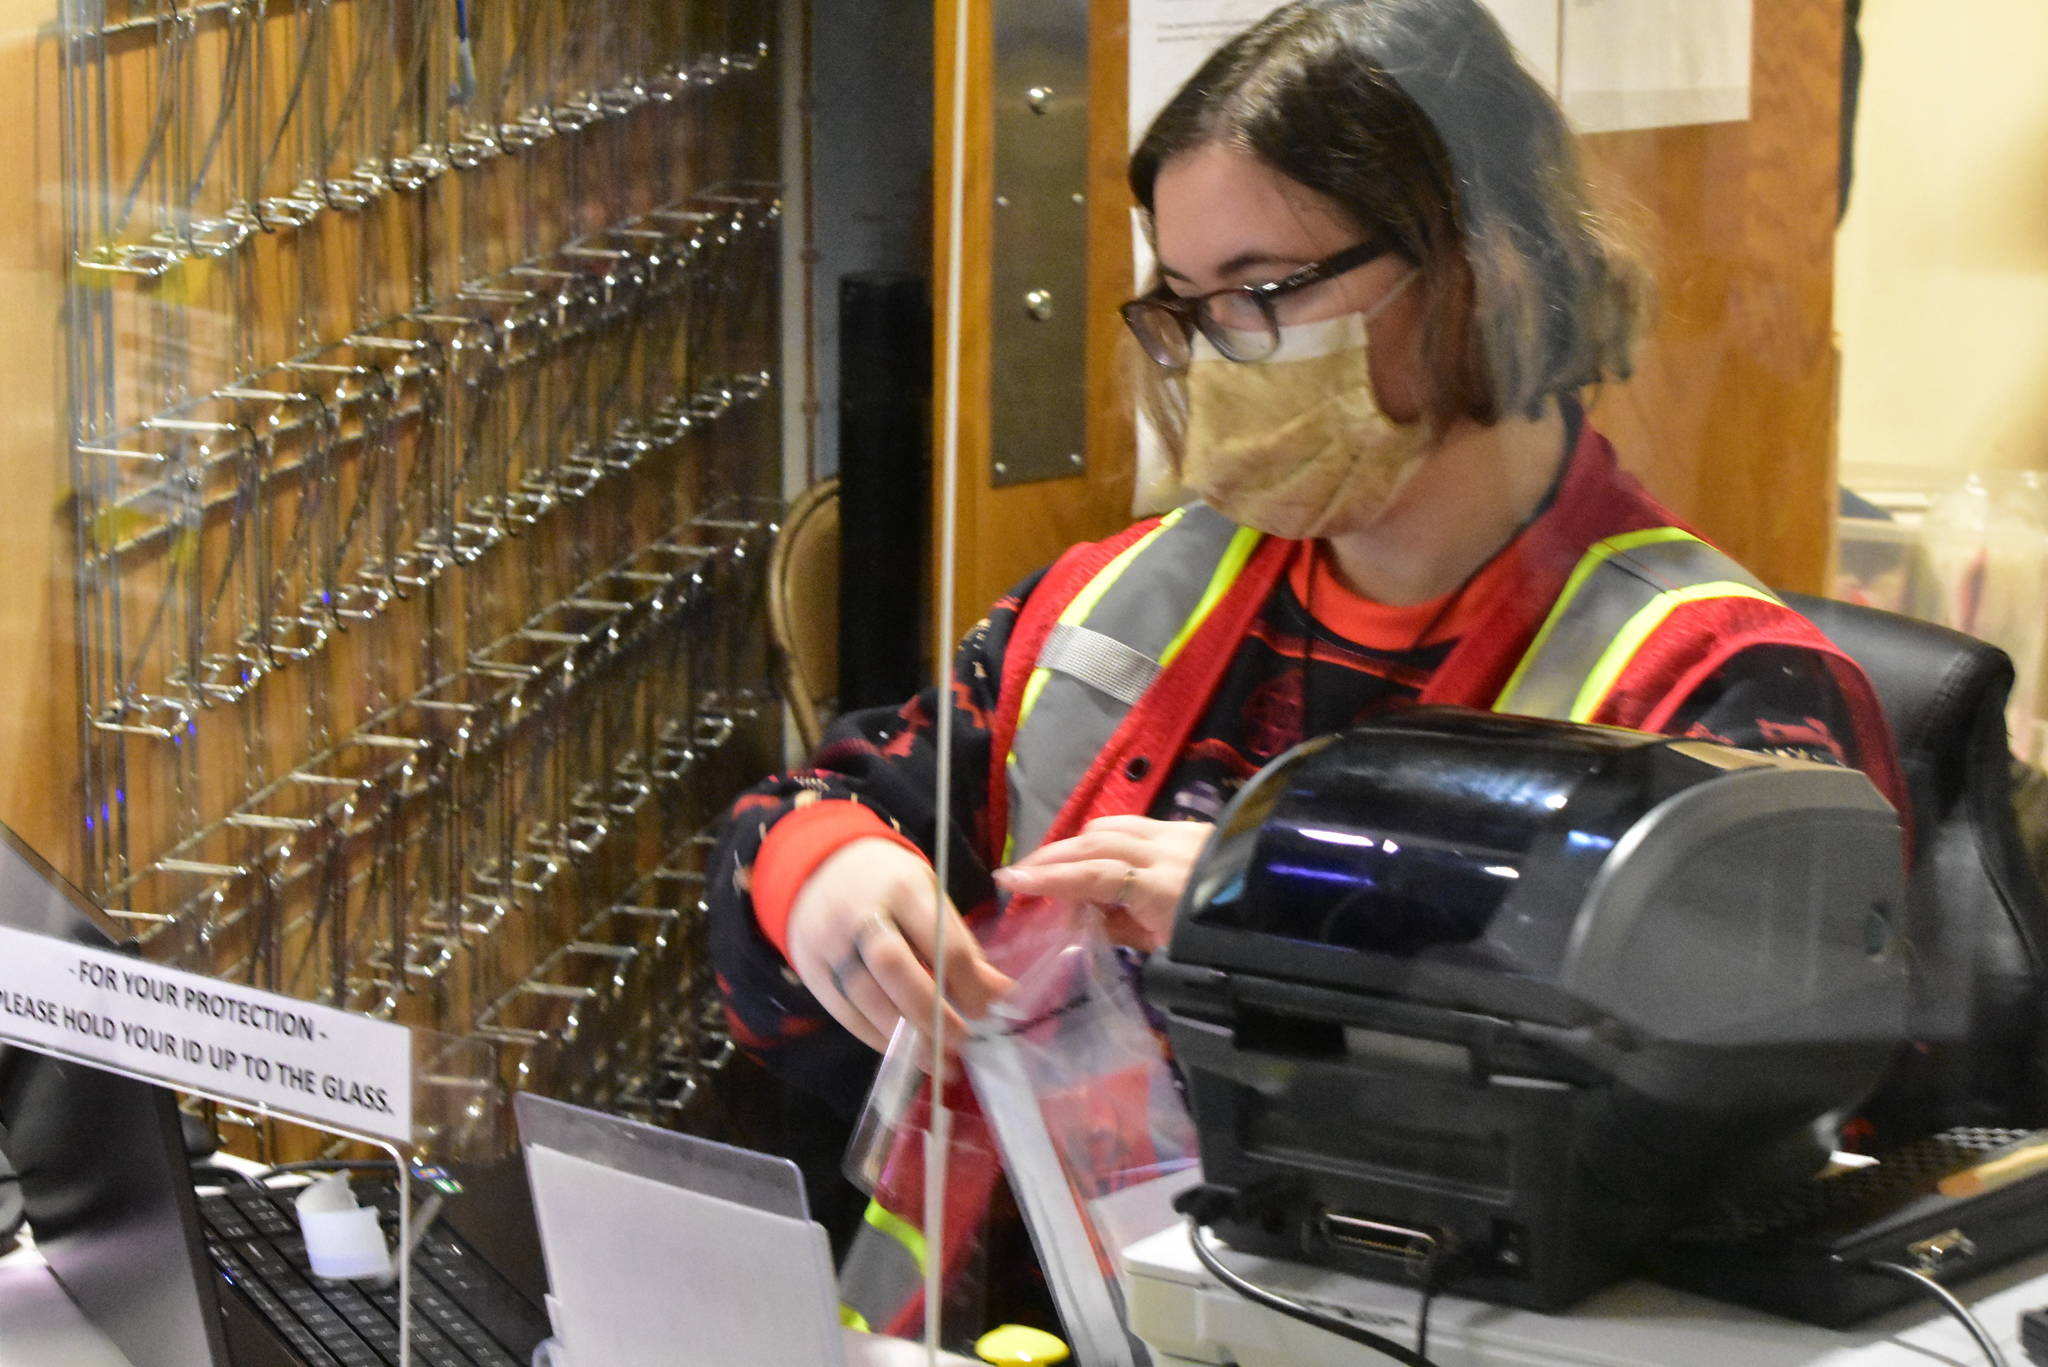 Emergency worker Amyrlin Thorne prepares a test kit for the screening station at Juneau International Airport on Monday, Oct. 12, 2020. (Peter Segall / Juneau Empire)